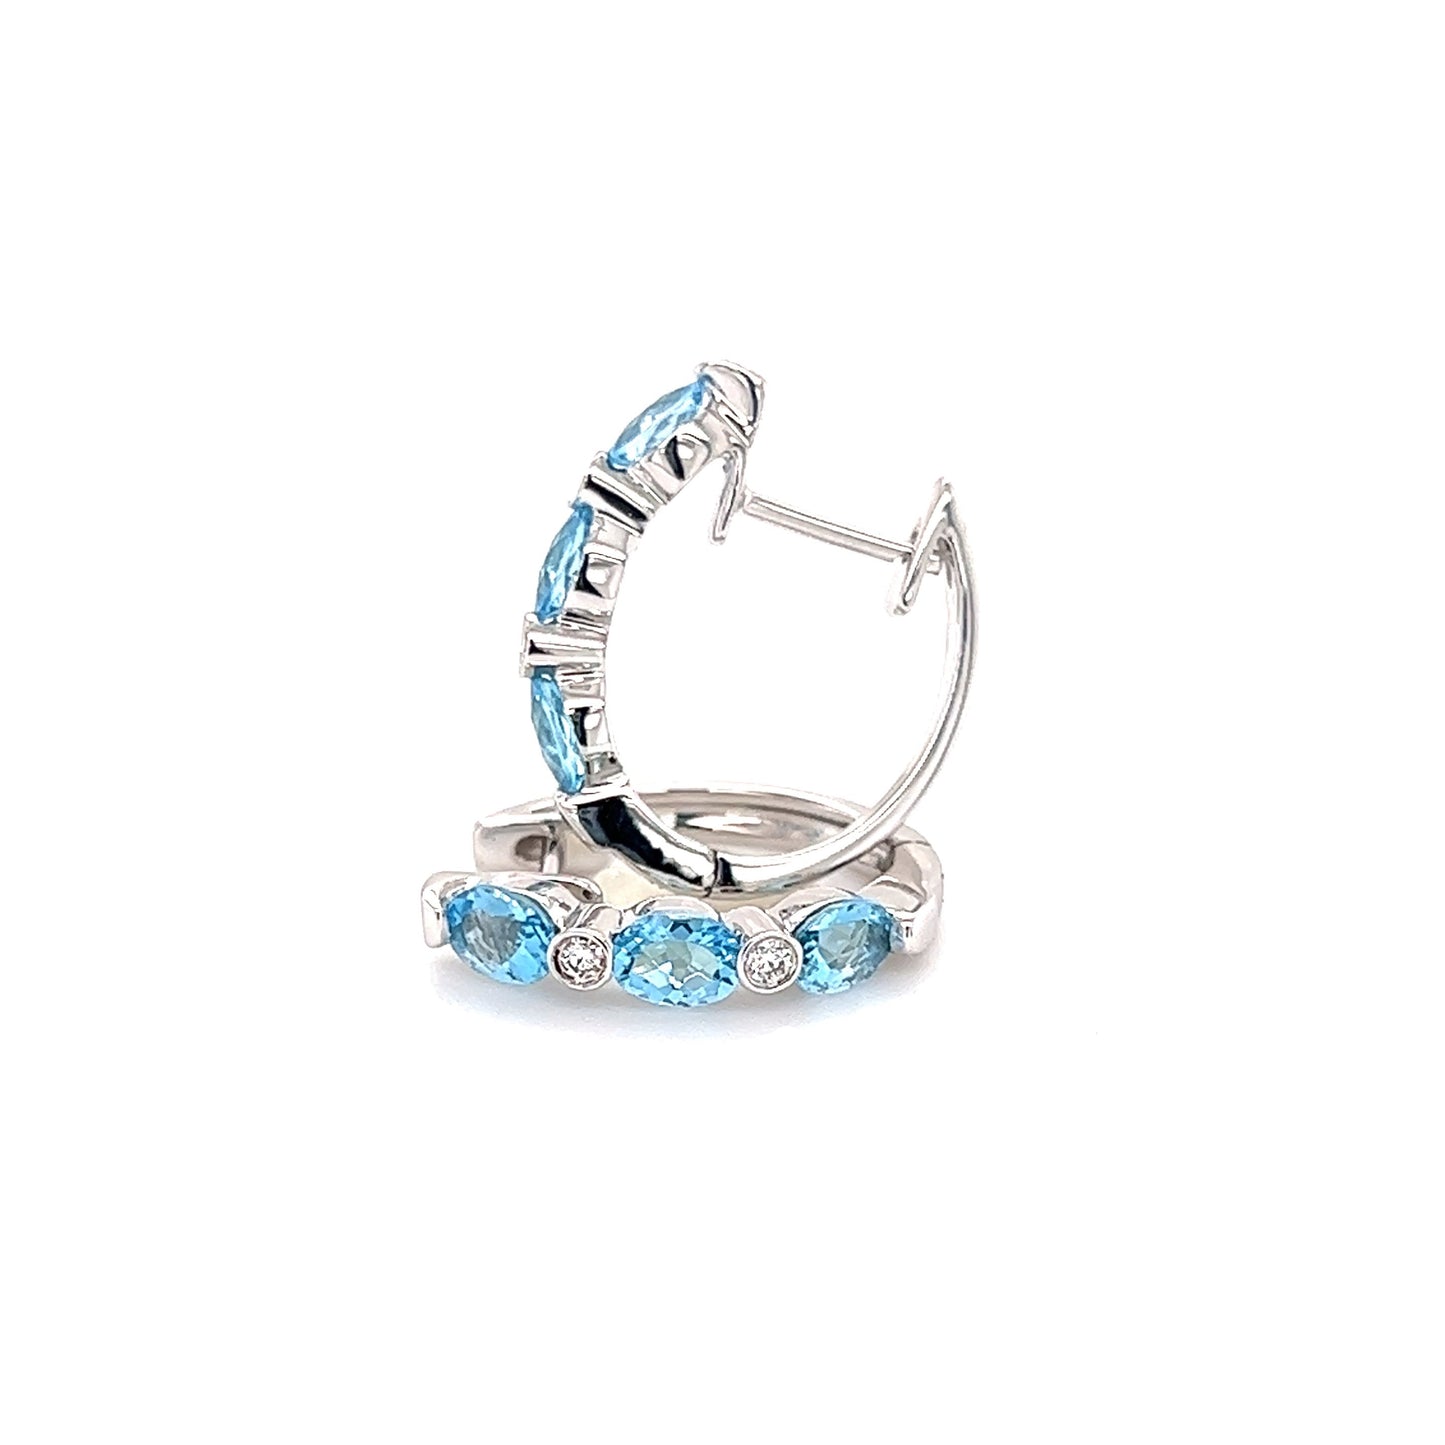 Aquamarine Hoop Earrings with Four Diamonds in 14K White Gold Front and Side View